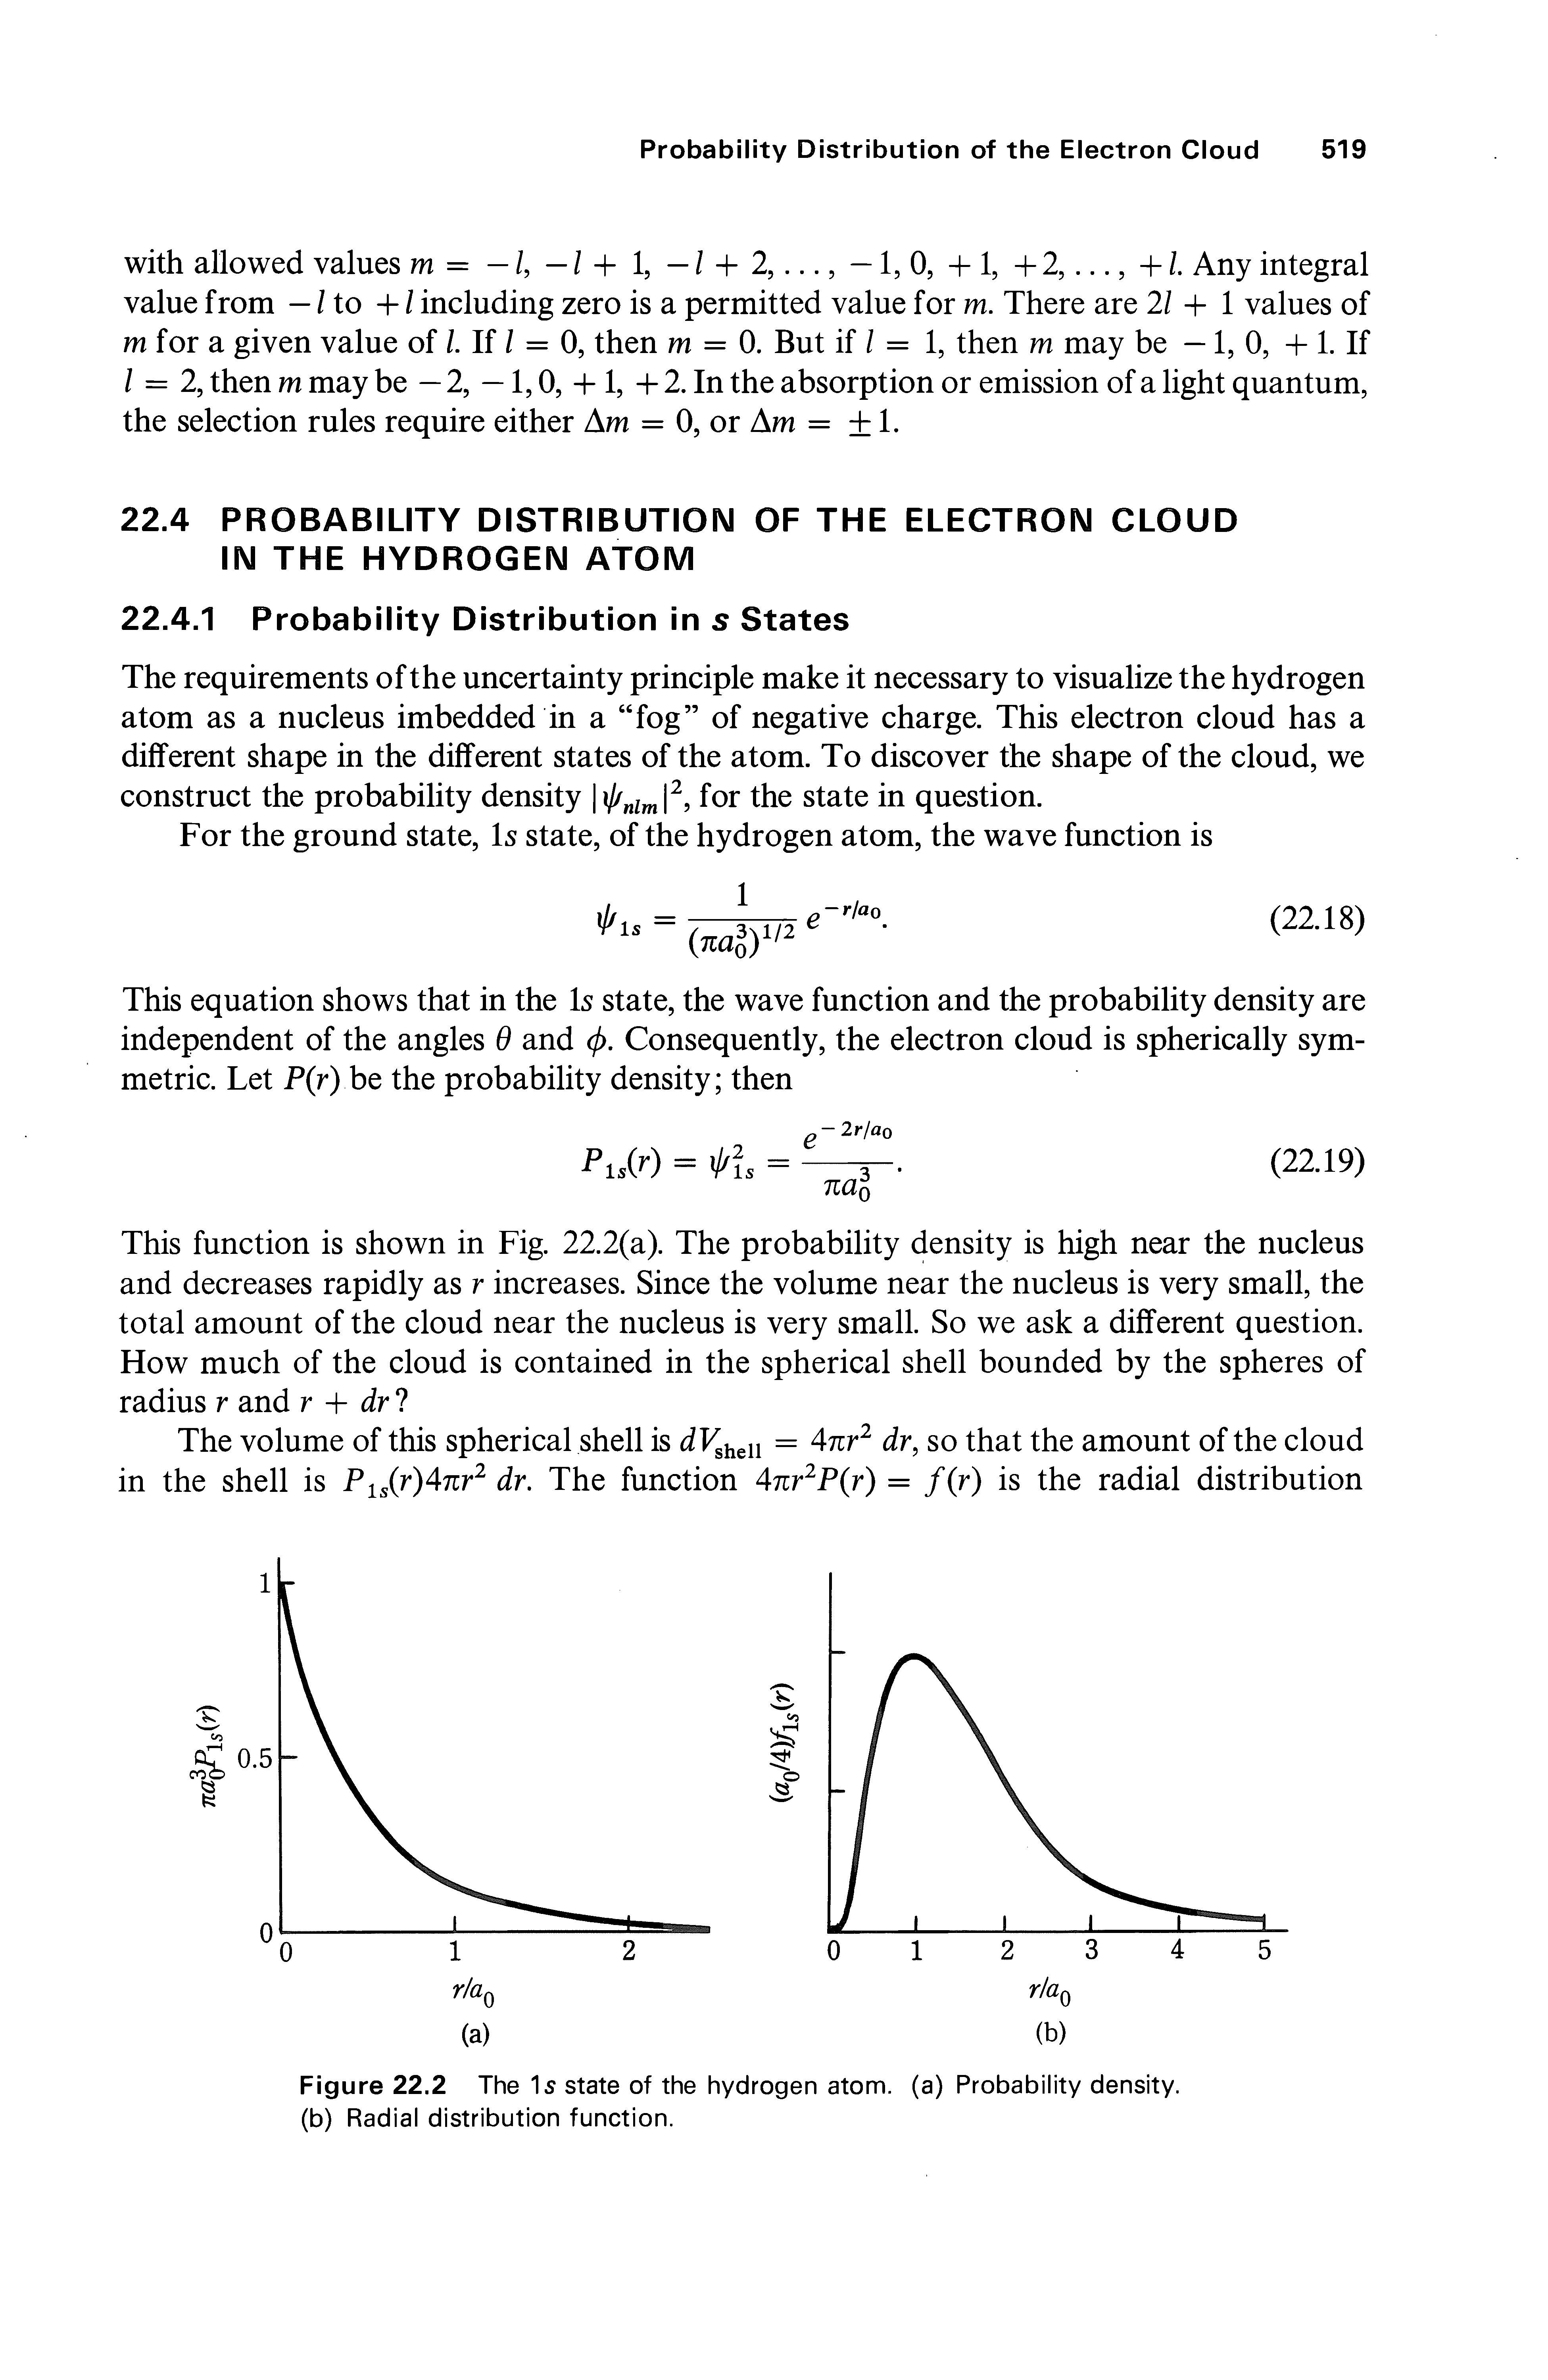 Figure 22.2 The s state of the hydrogen atom, (a) Probability density, (b) Radial distribution function.